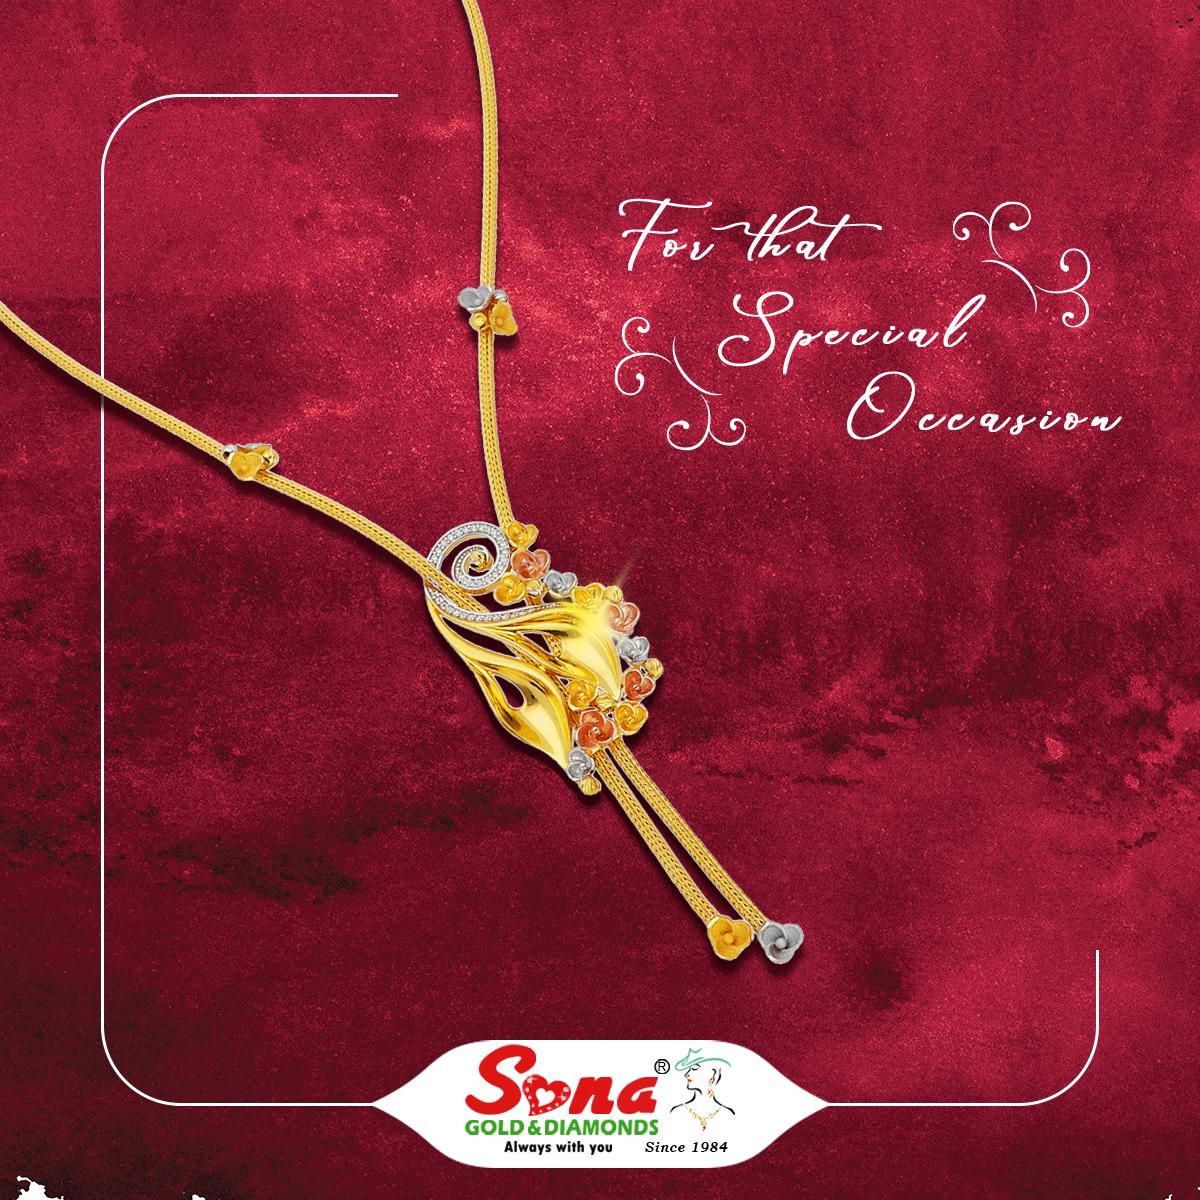 Celebrate the auspicious occasions with exquisite collections of jewellery from Sona Gold & Diamonds.

#SonaGoldandDiamonds #JewelleryCollections #pendantcollection #bestpendant #weddingpendant #partypendant #pendants #pendant #beautifulpendant